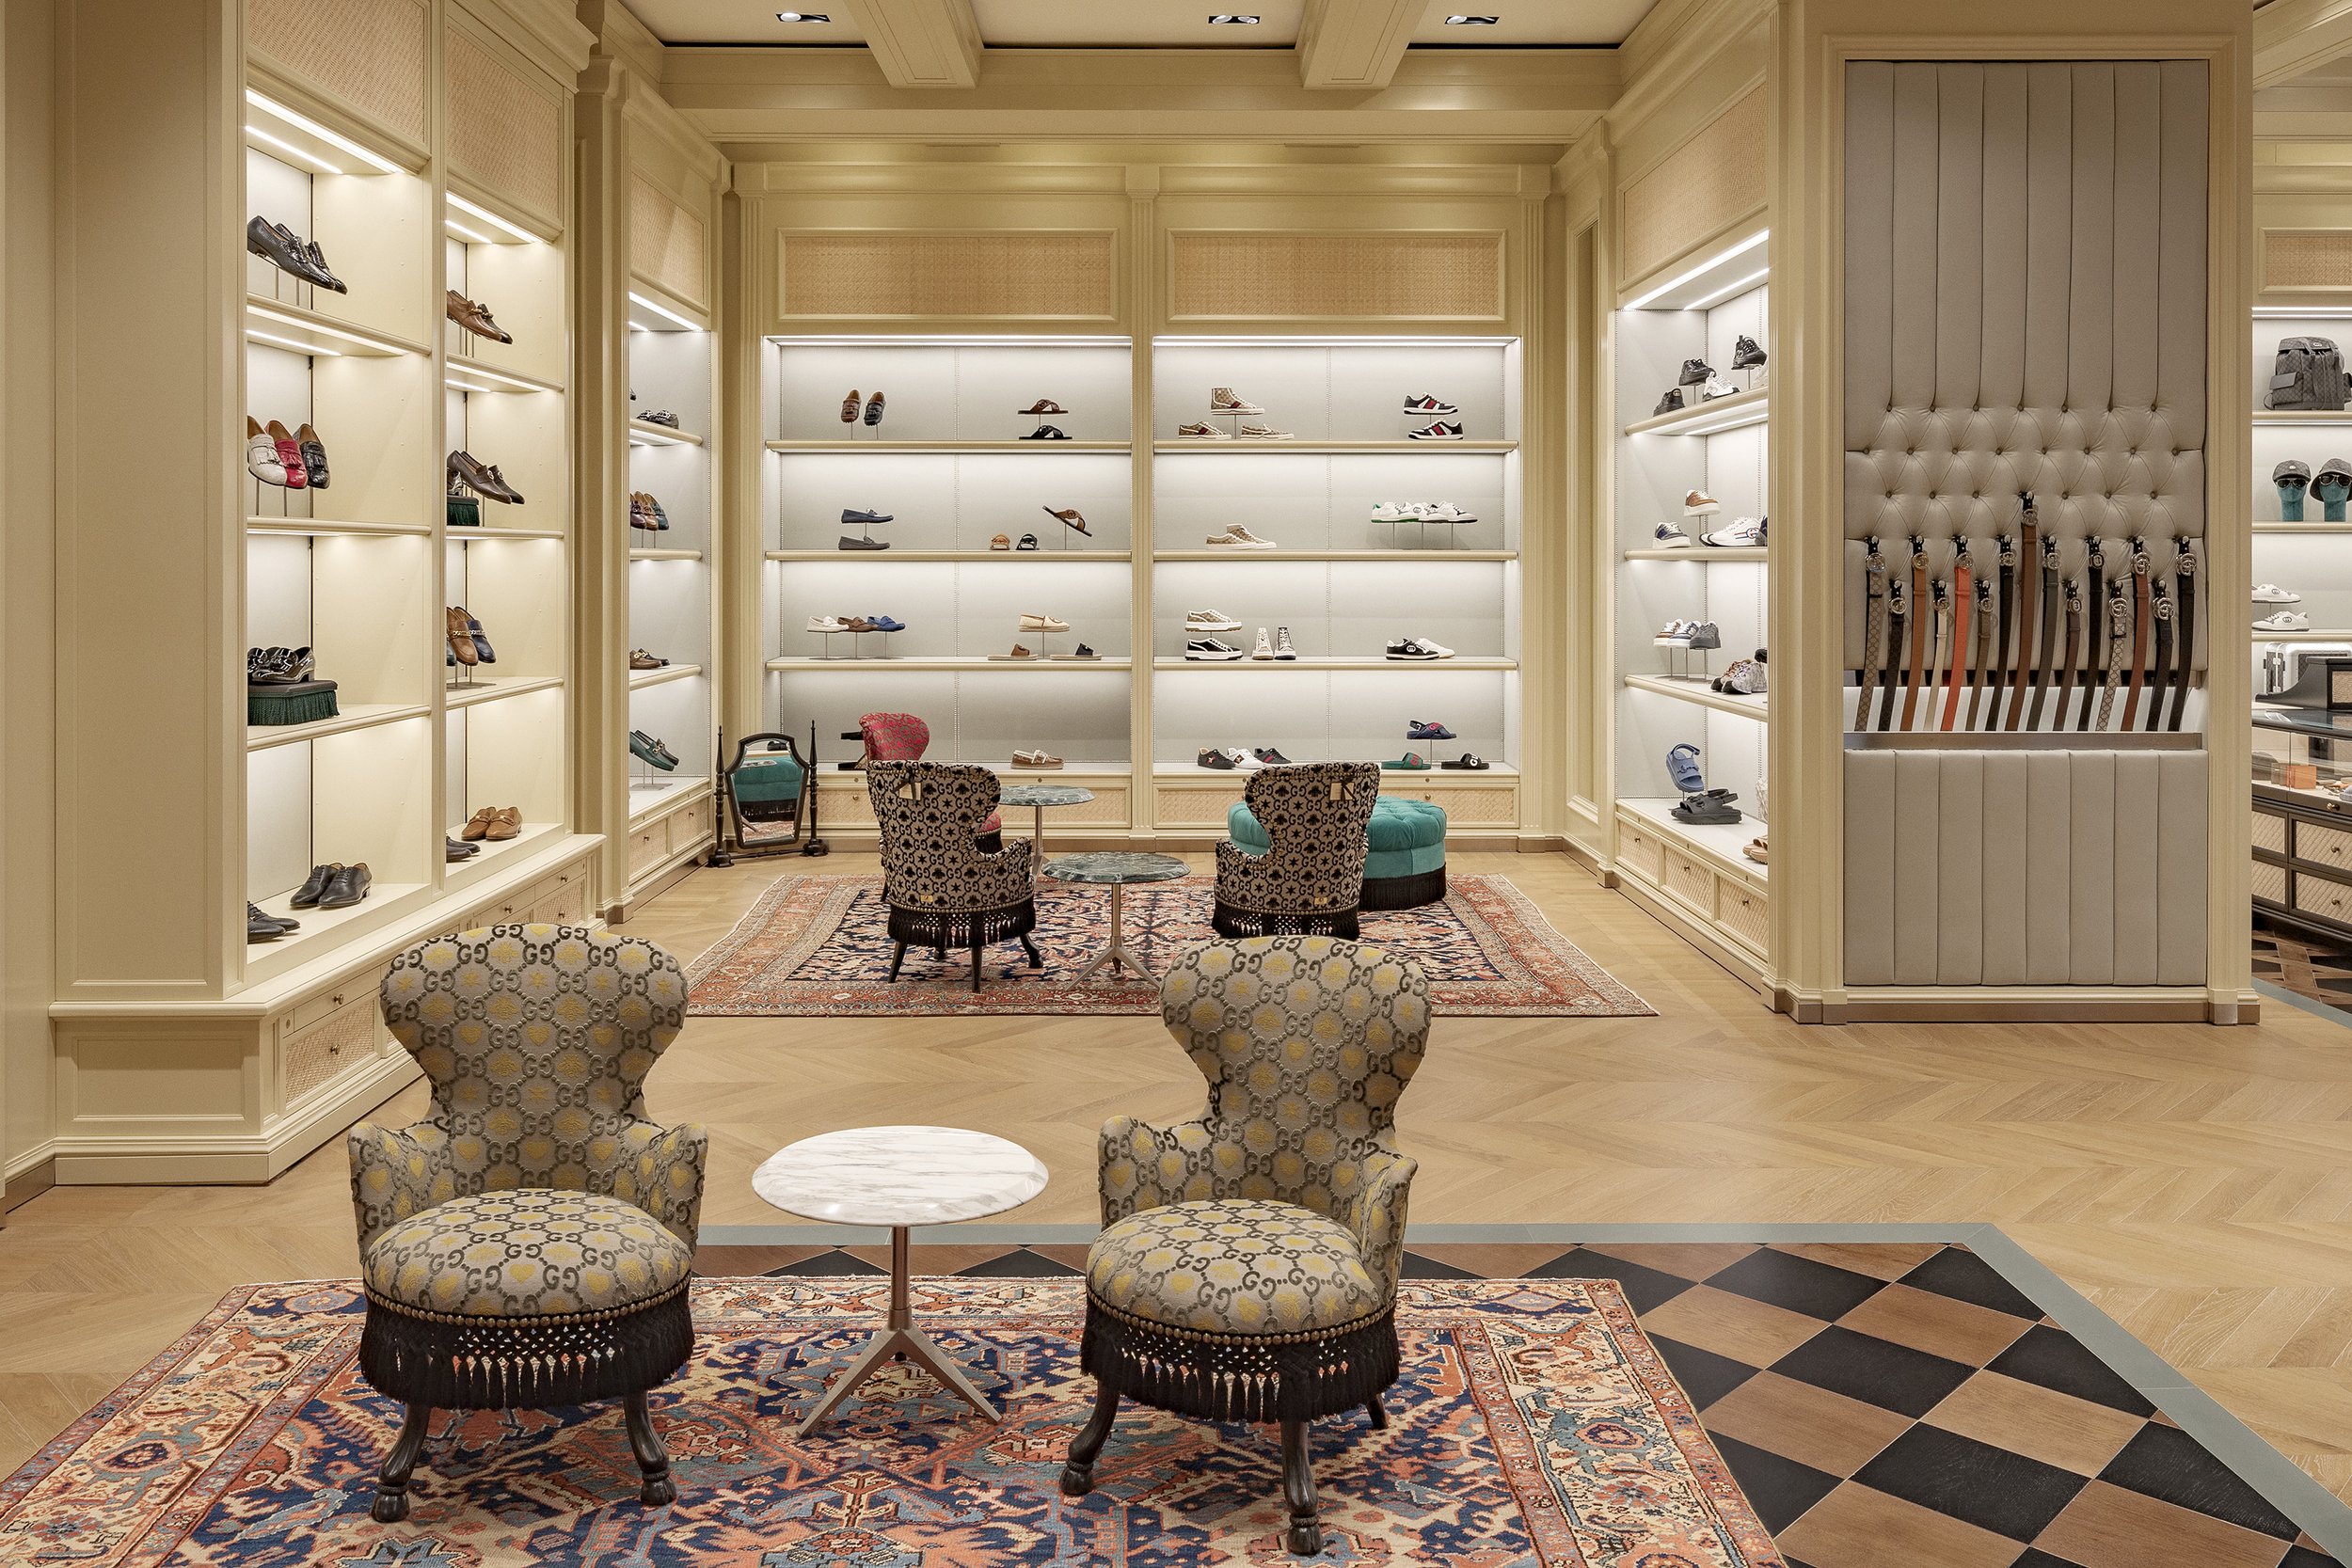 Gucci Opens Newly Expanded Two-Story Lavish Boutique At Bal Harbour Shops 3.jpg